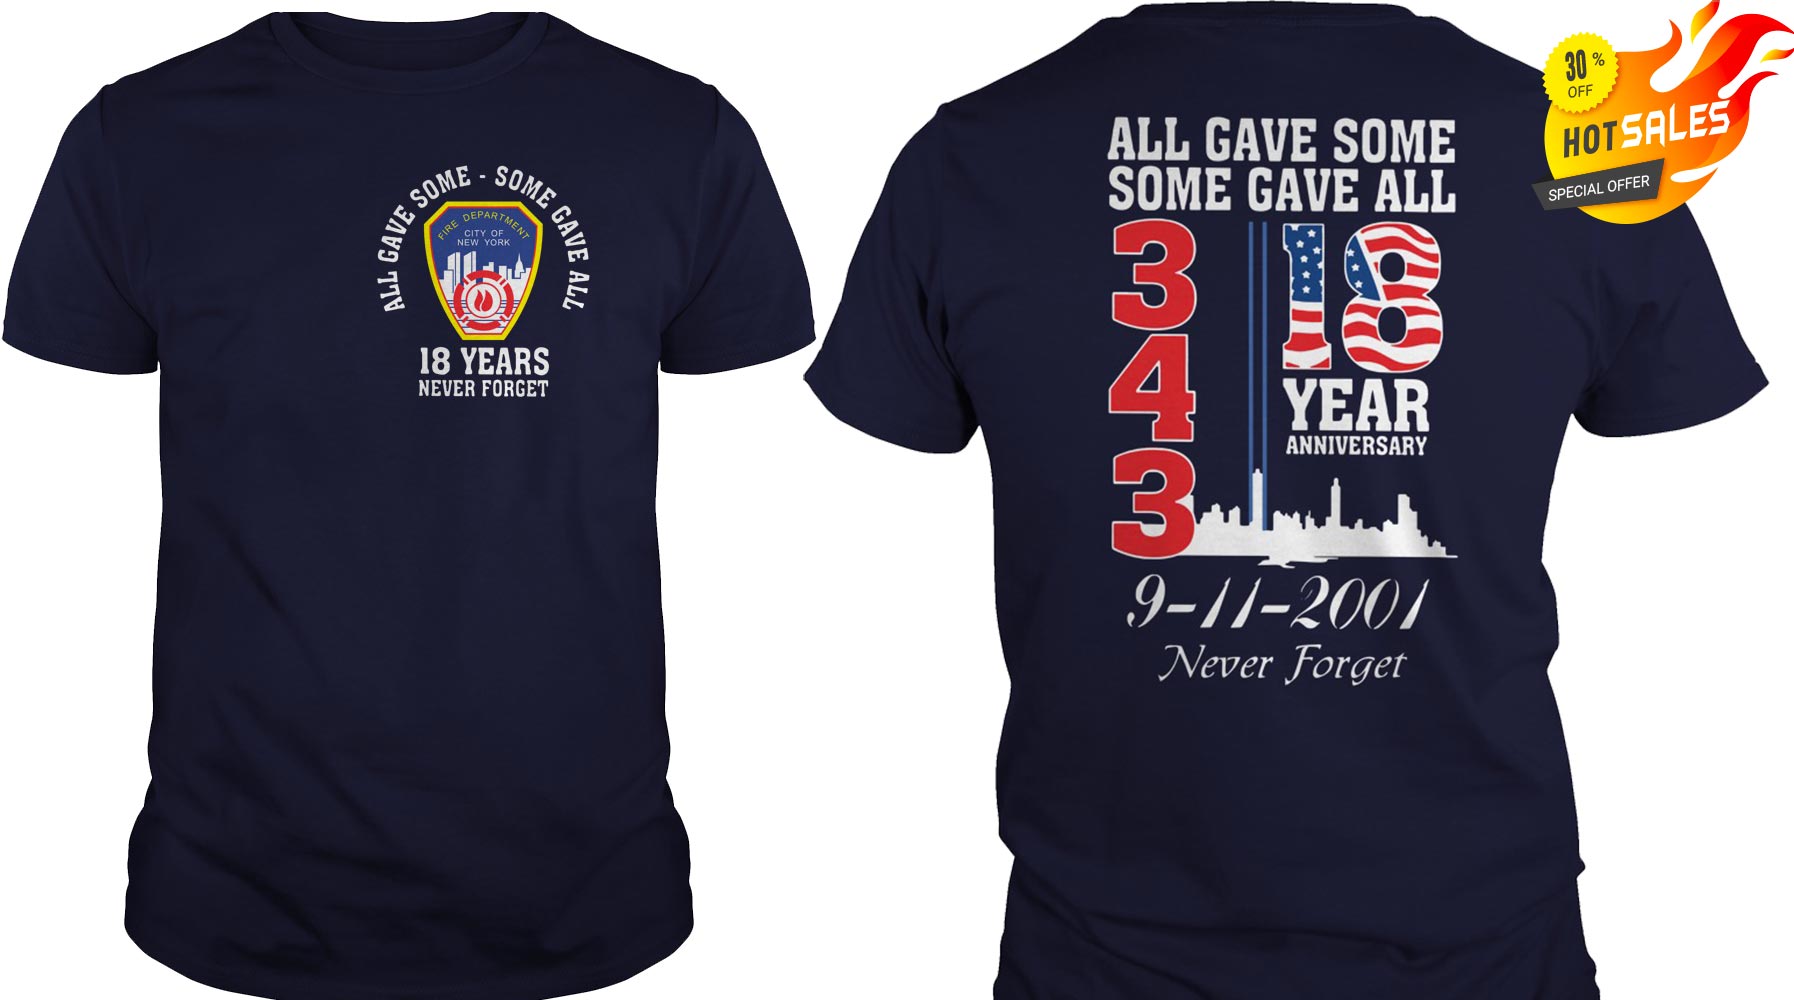 All-gave-some-some-gave-all-18-years-Anniversary-343-9-11-2001-never-forget-shirt